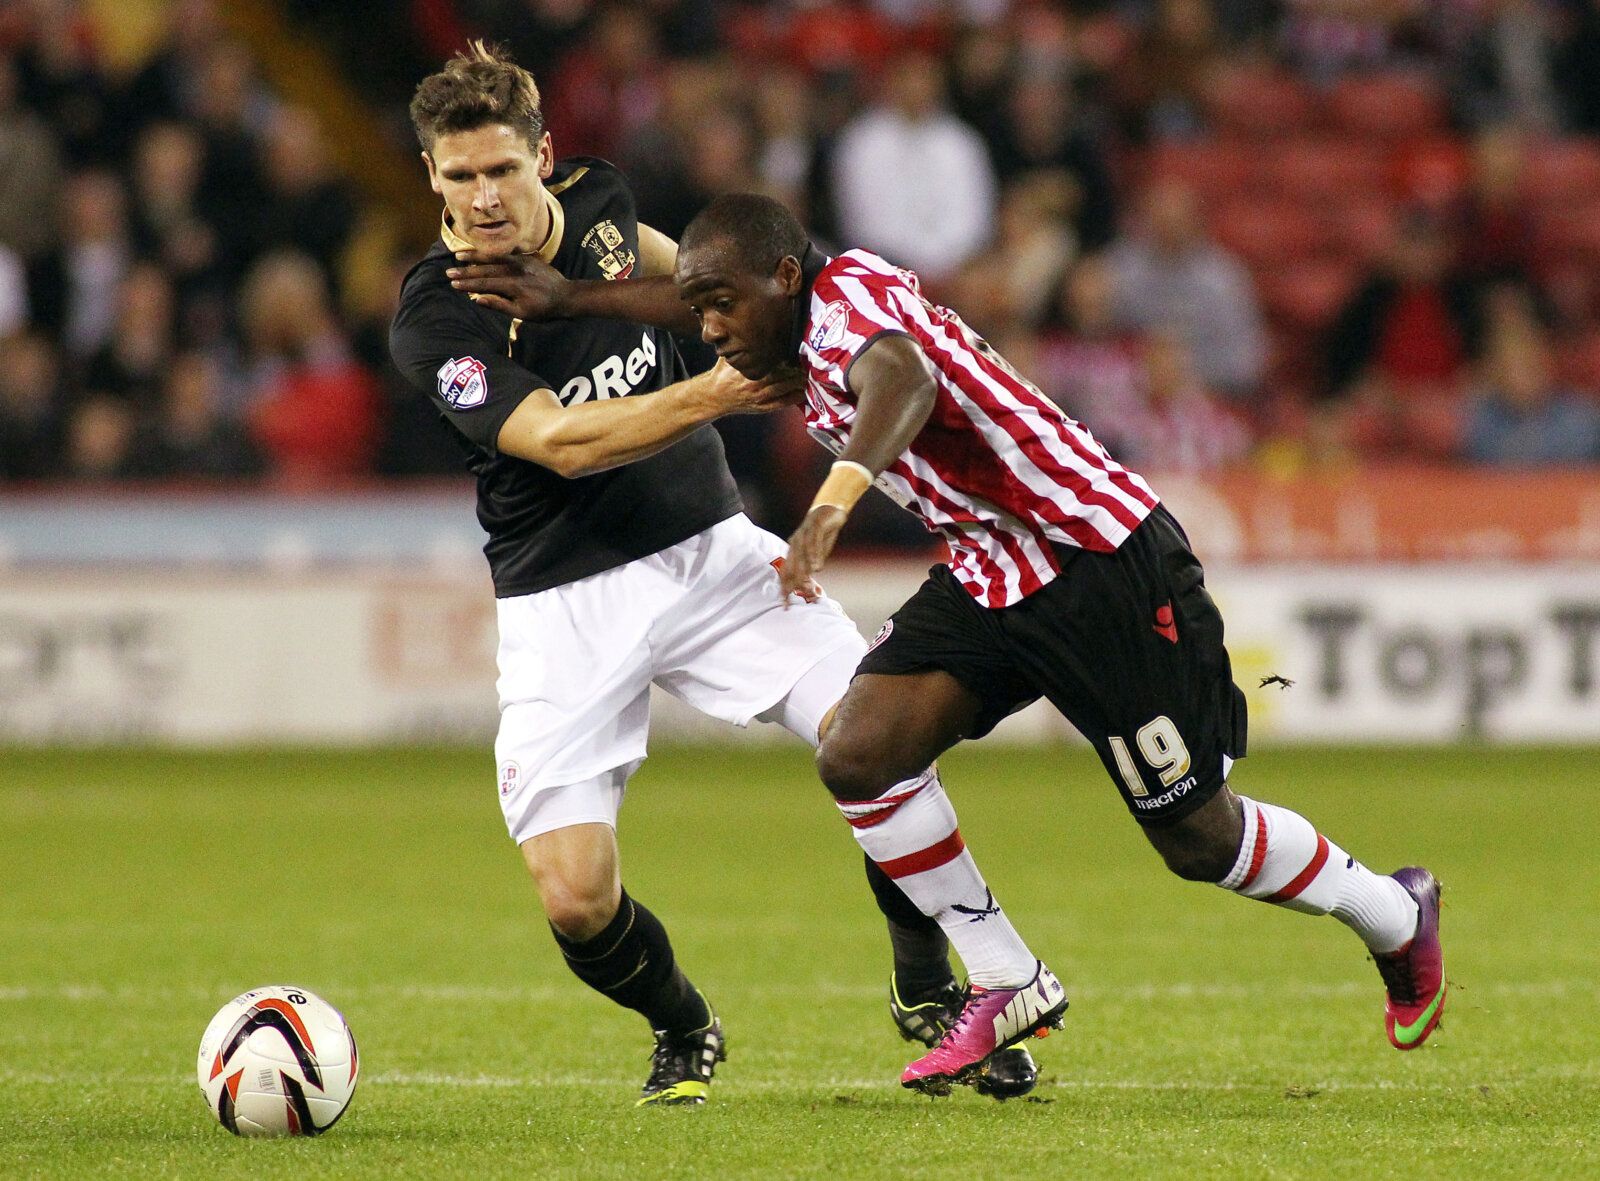 Football - Sheffield United v Crawley Town - Sky Bet Football League One - Bramall Lane - 4/10/13 
Febian Brandy of Sheffiled United (R) and Josh Simpson of Crawley Town in action 
Mandatory Credit: Action Images / Ed Sykes 
Livepic 
EDITORIAL USE ONLY. No use with unauthorized audio, video, data, fixture lists, club/league logos or live services. Online in-match use limited to 45 images, no video emulation. No use in betting, games or single club/league/player publications.  Please contact your